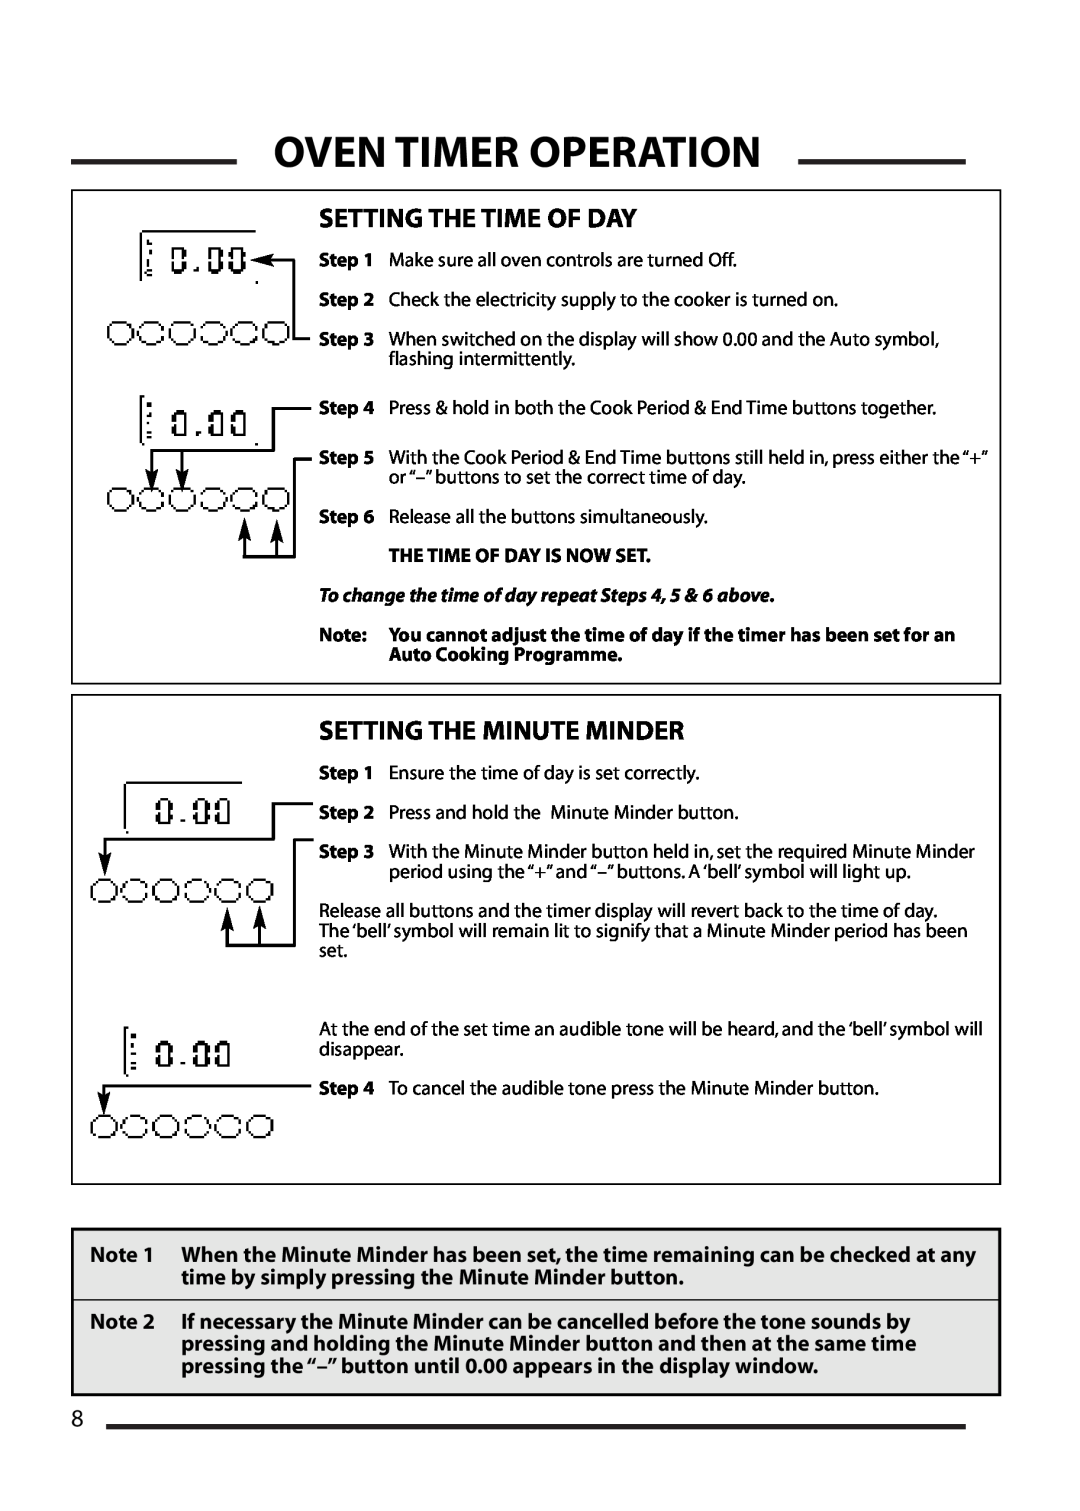 Cannon 4466200024-01 installation instructions Oven Timer Operation, Setting The Time Of Day, Setting The Minute Minder 